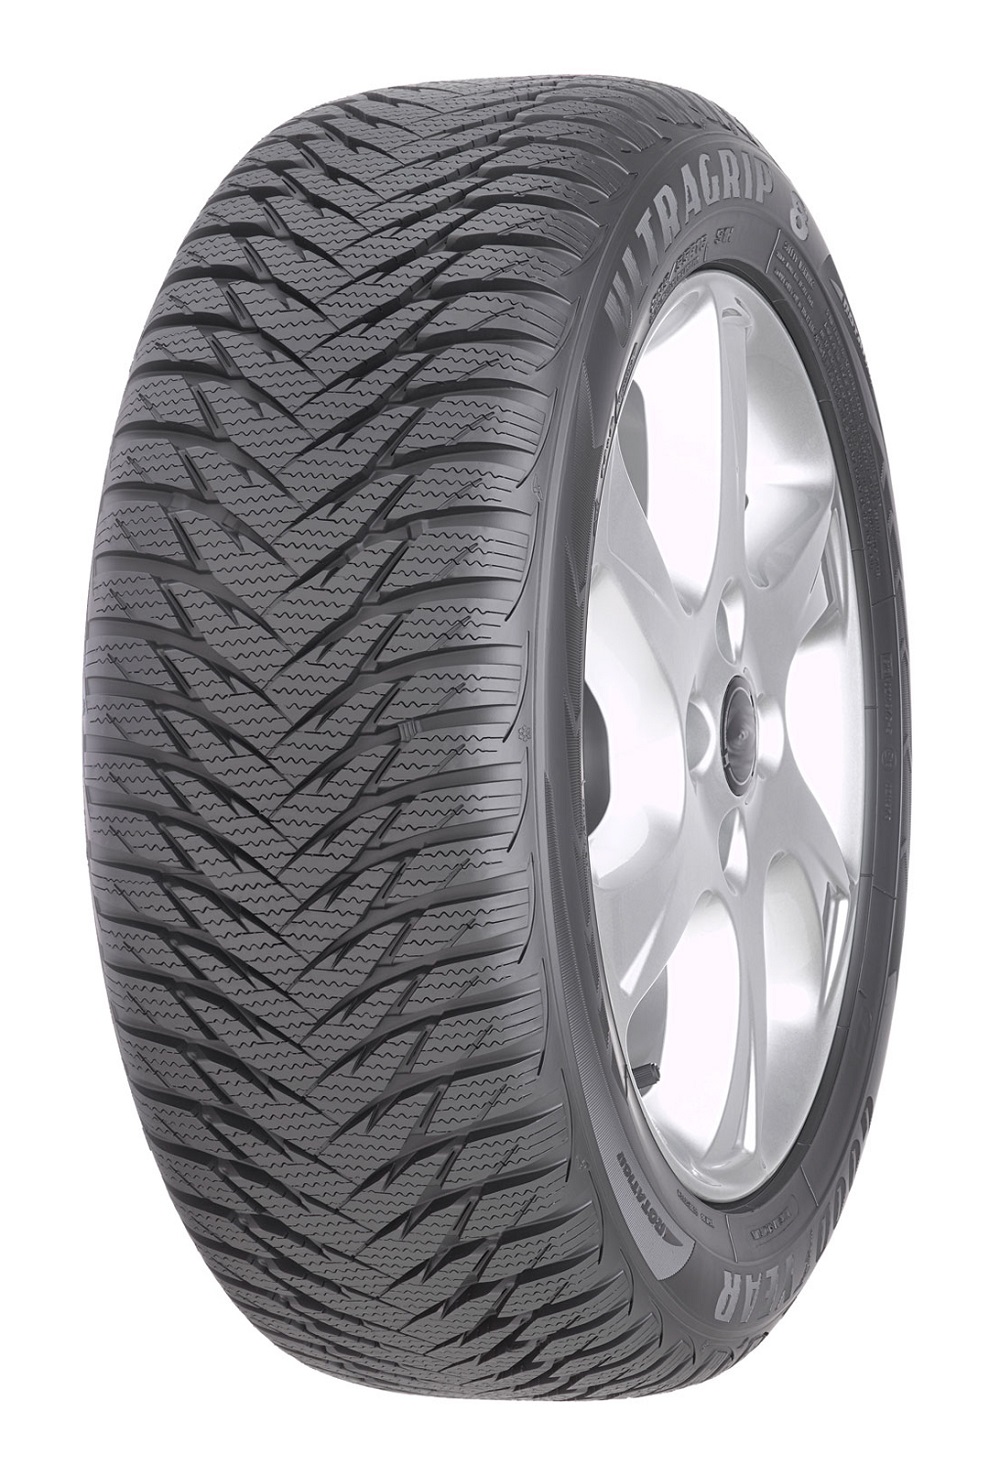 Anvelopa Iarna Goodyear Ultra Grip Performace+ 215/65R16 98T